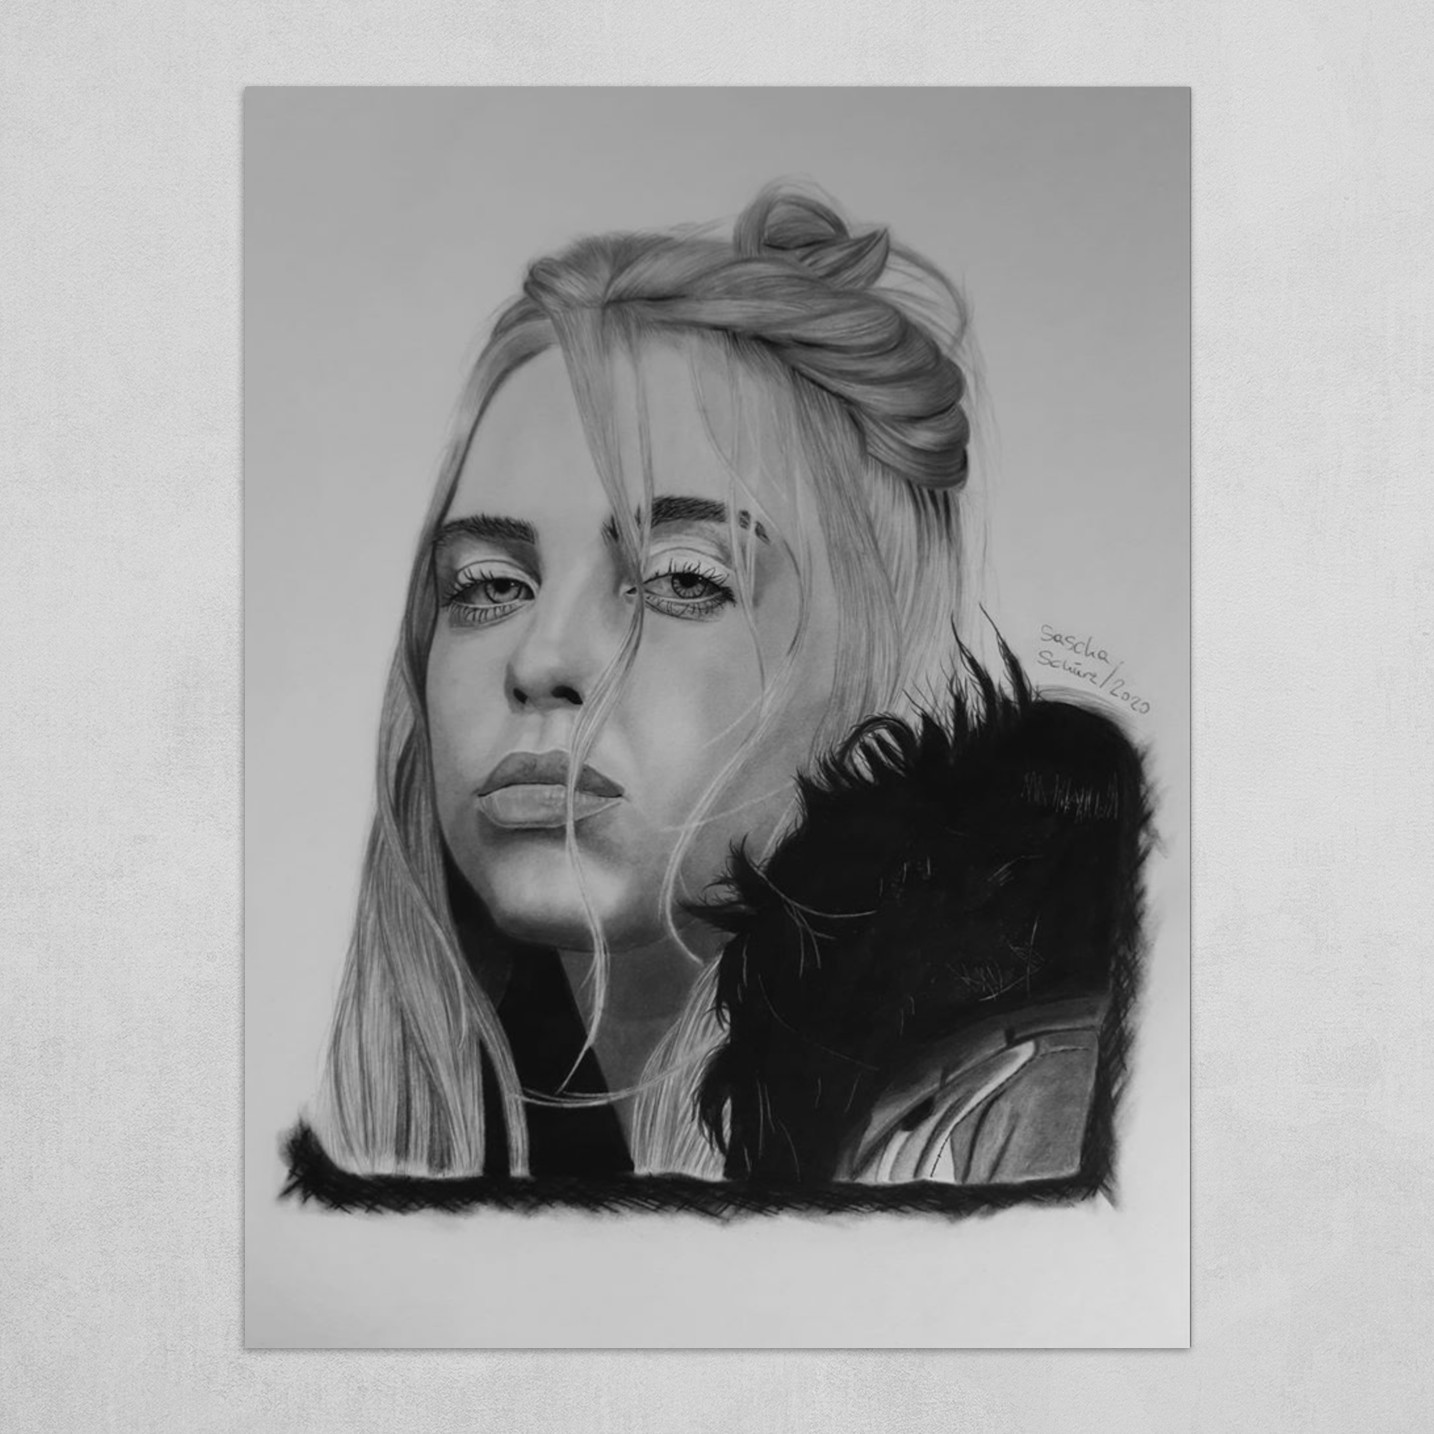 How to draw BillieEilish  One Pencil Sketching  Drawing Billie Eilish  Easy Steps  YouTube